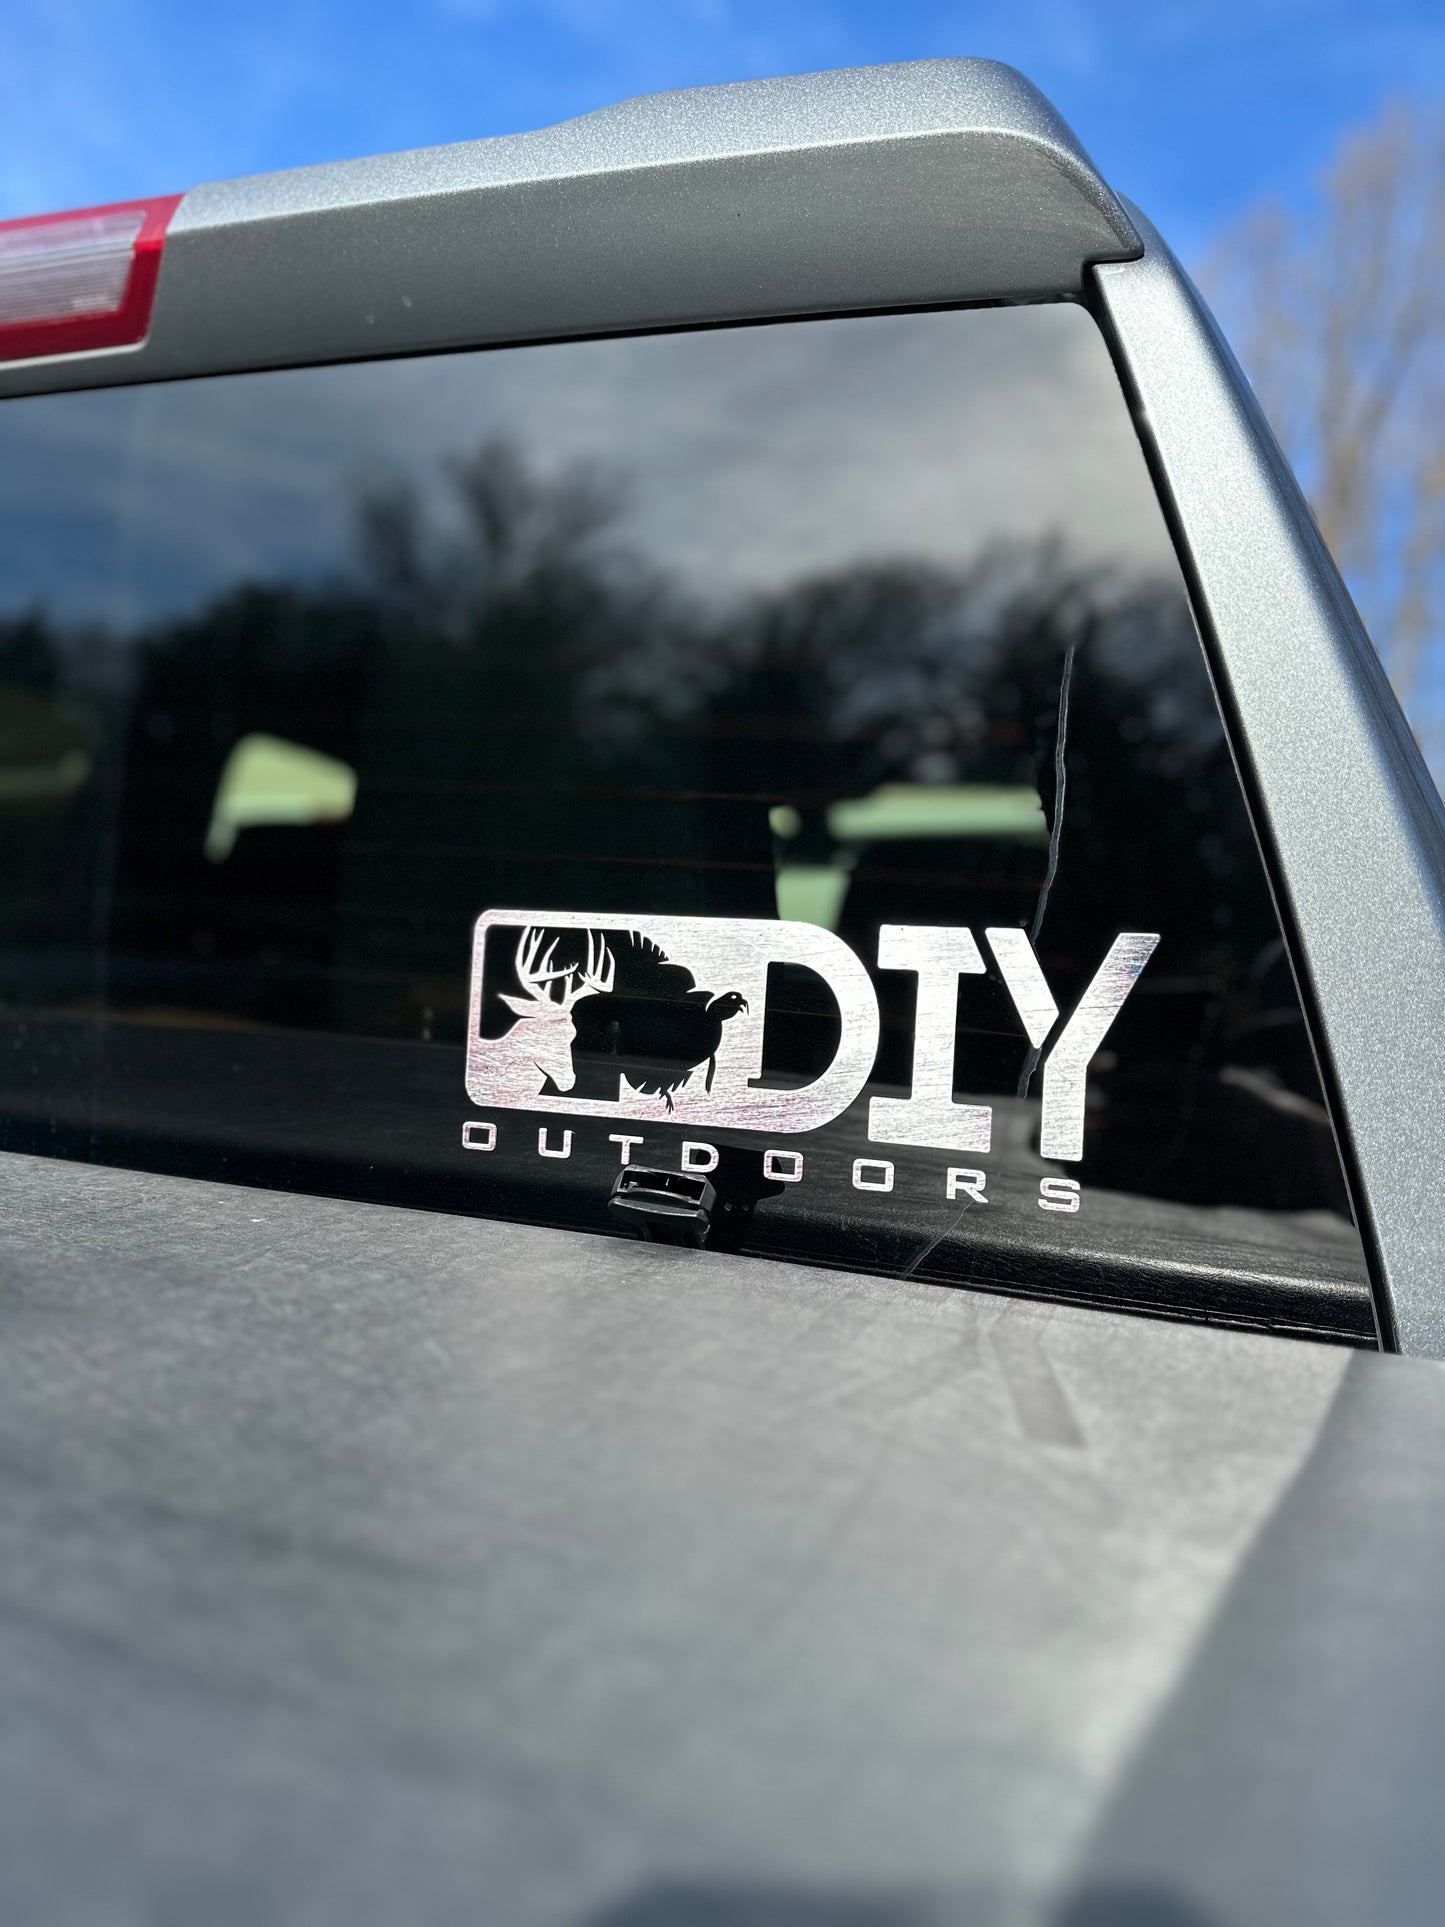 OFFICAL LOGO DECAL